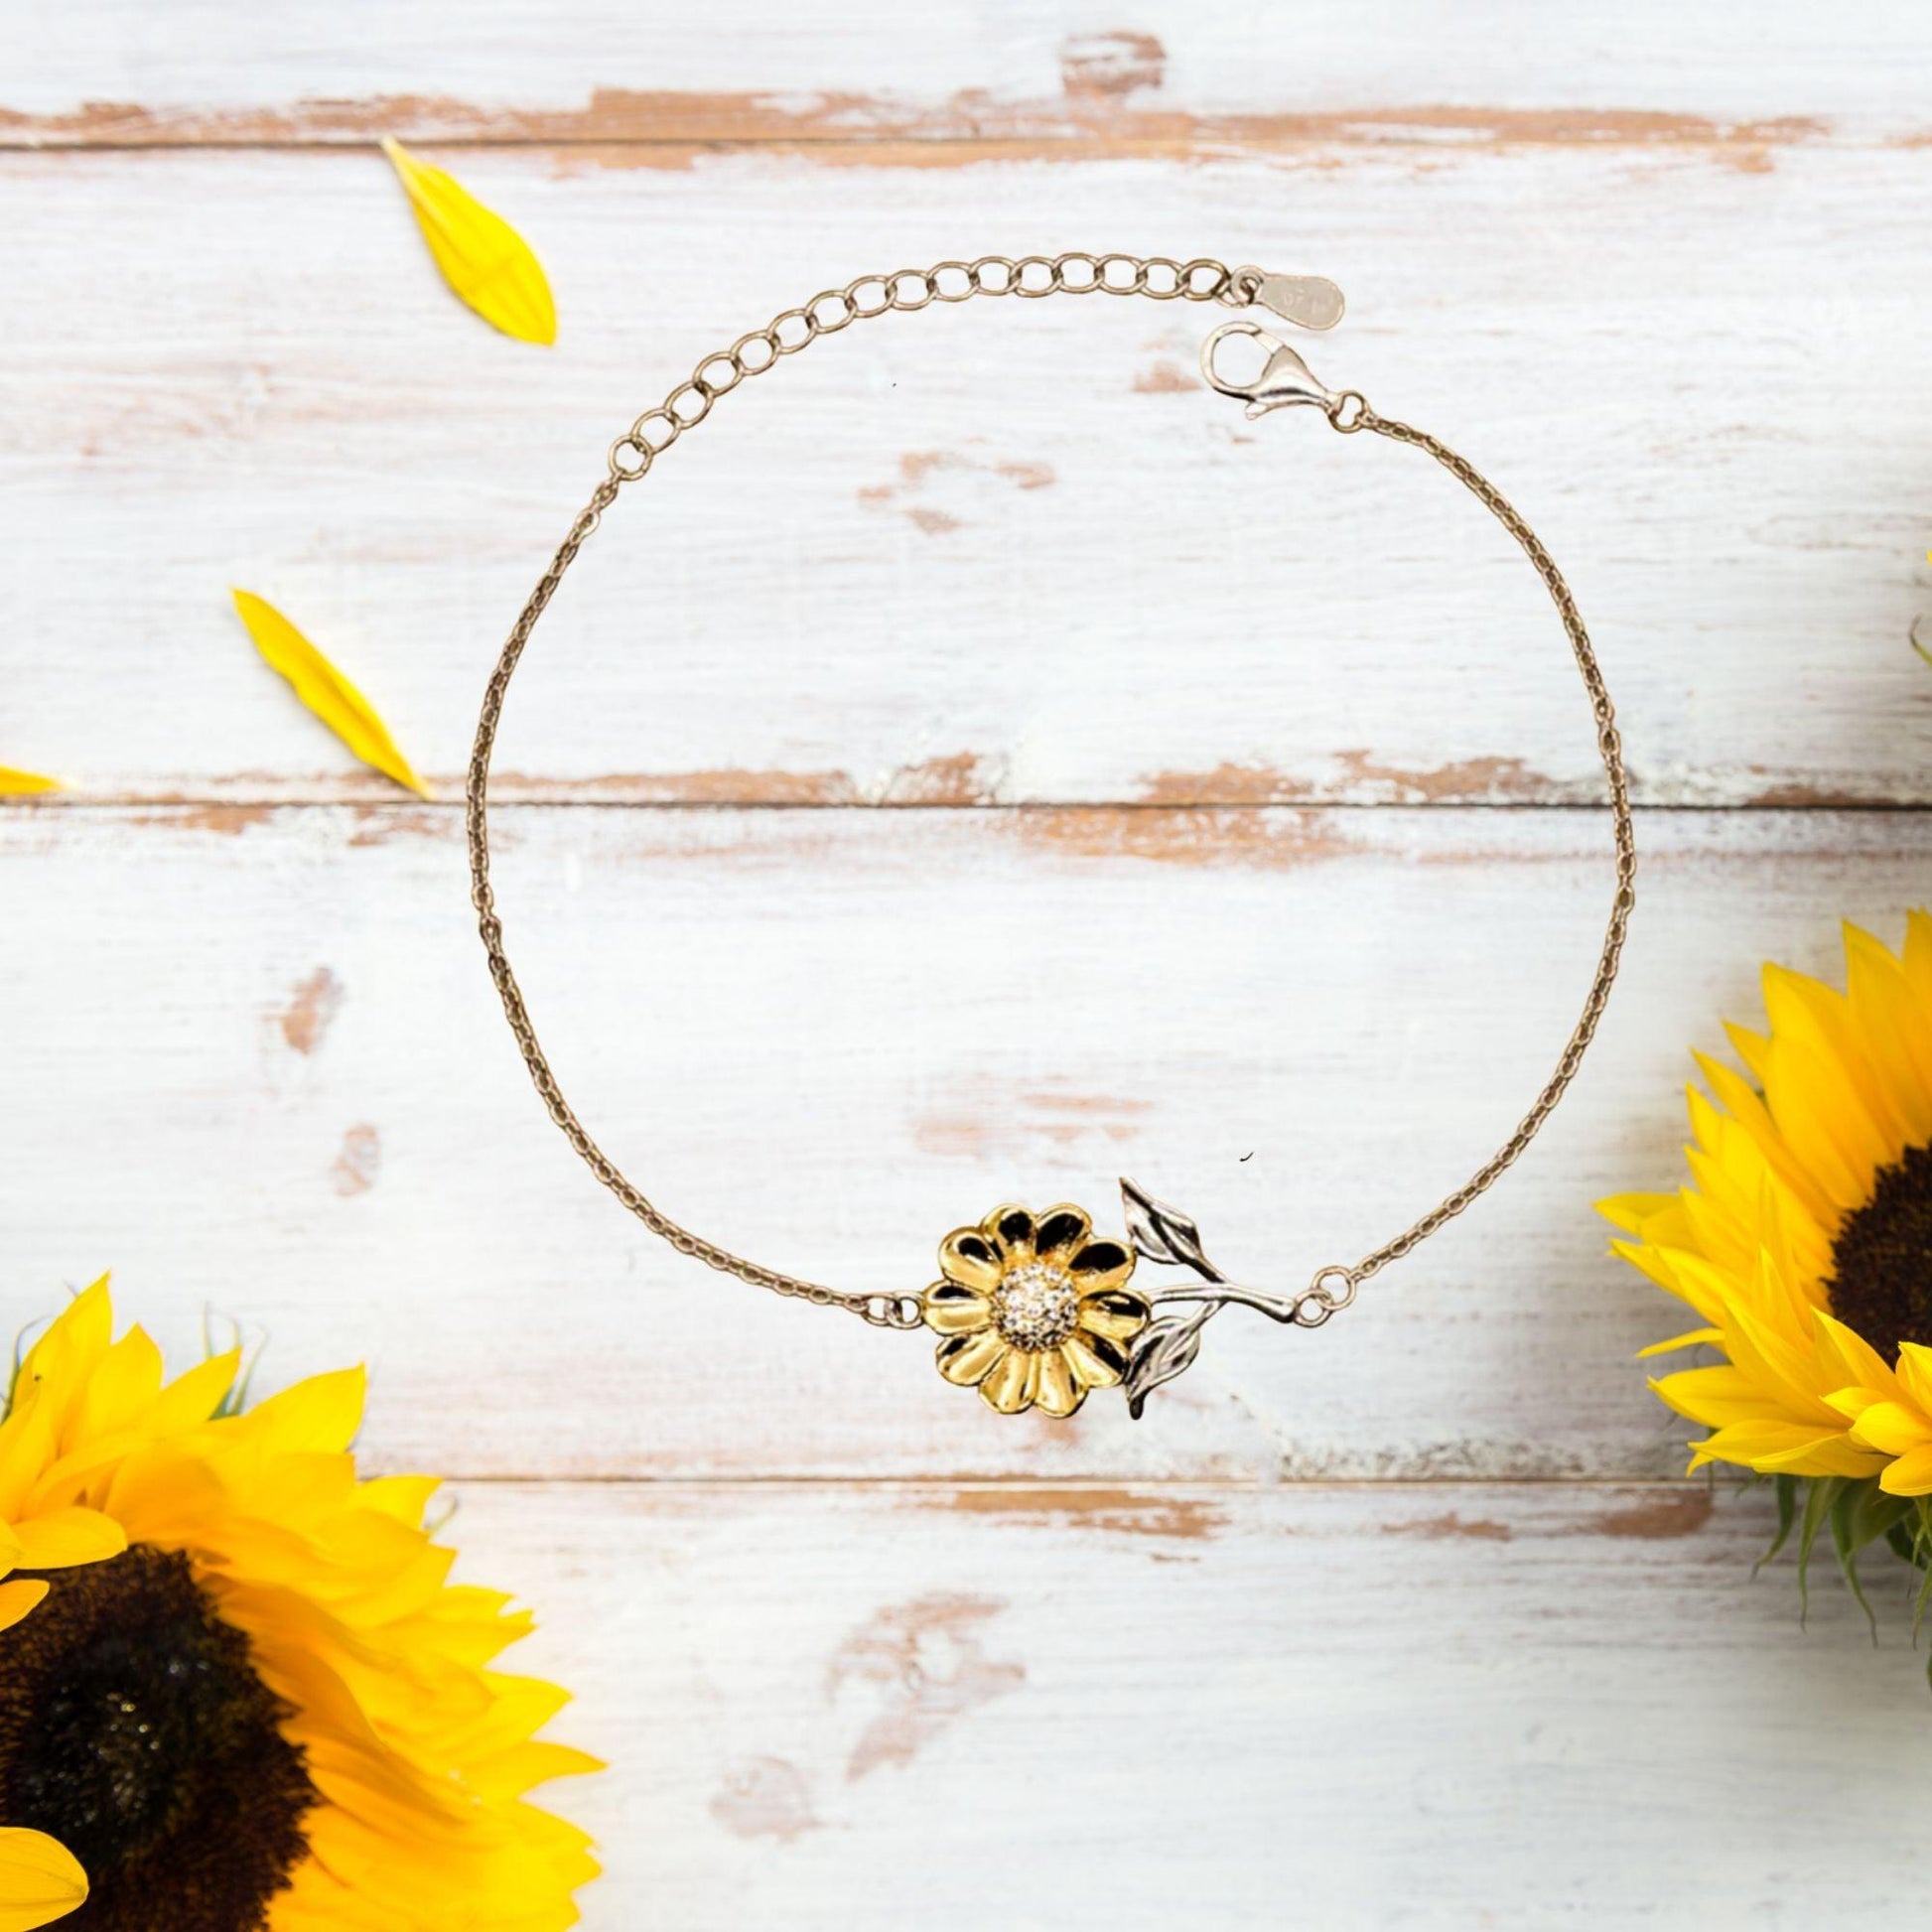 Sunflower Bracelet for Grandparents Present, Grandparents Always follow your dreams, never forget how amazing you are, Grandparents Birthday Christmas Gifts Jewelry for Girls Boys Teen Men Women - Mallard Moon Gift Shop